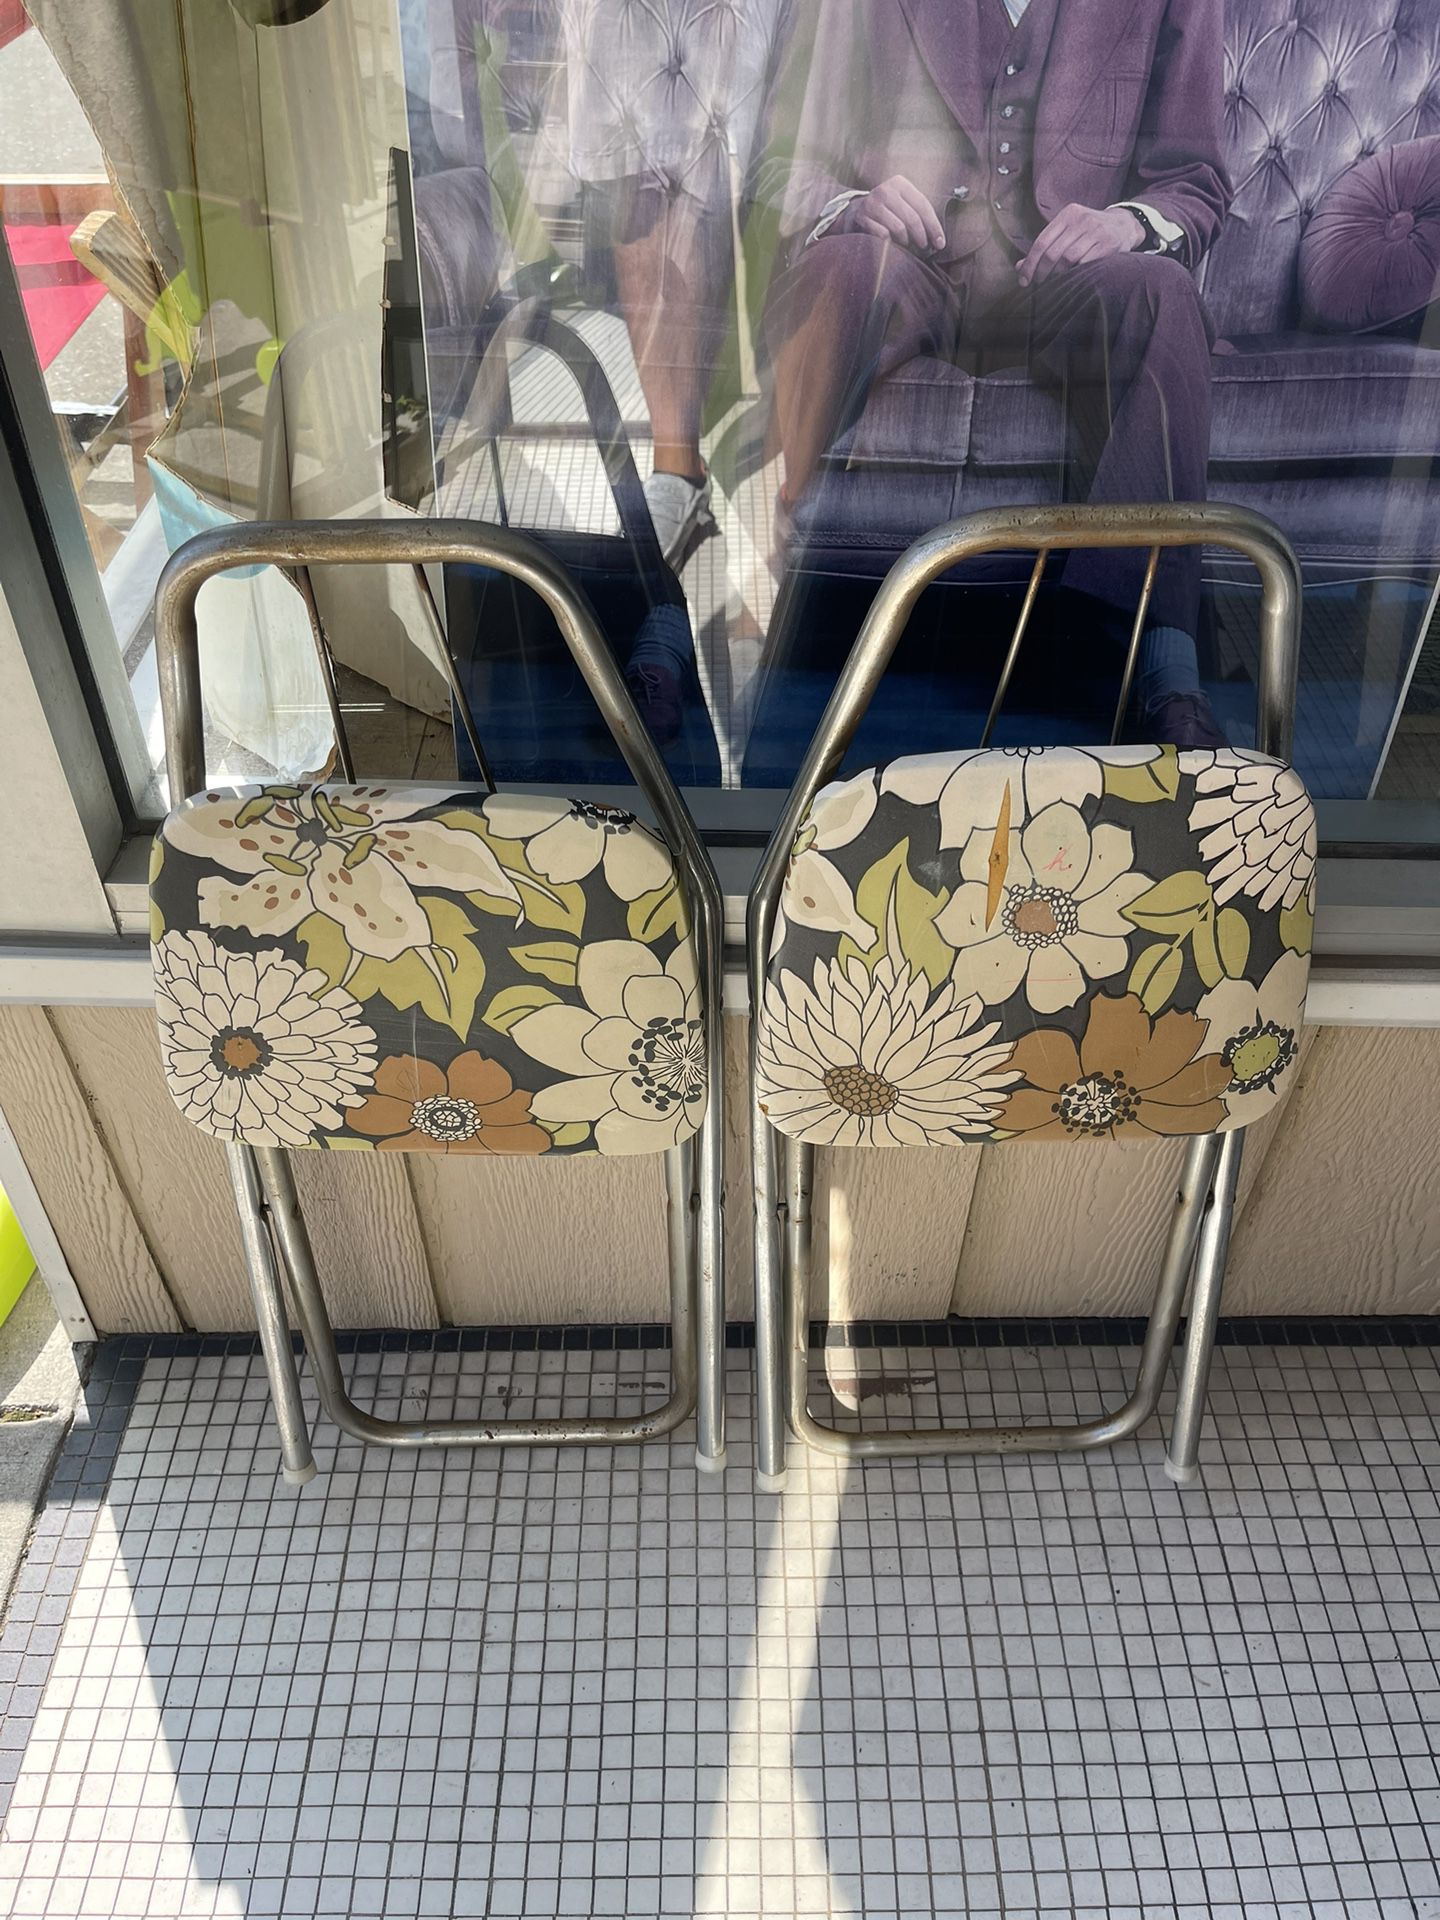 Vintage Pair Of Childs Folding Chairs